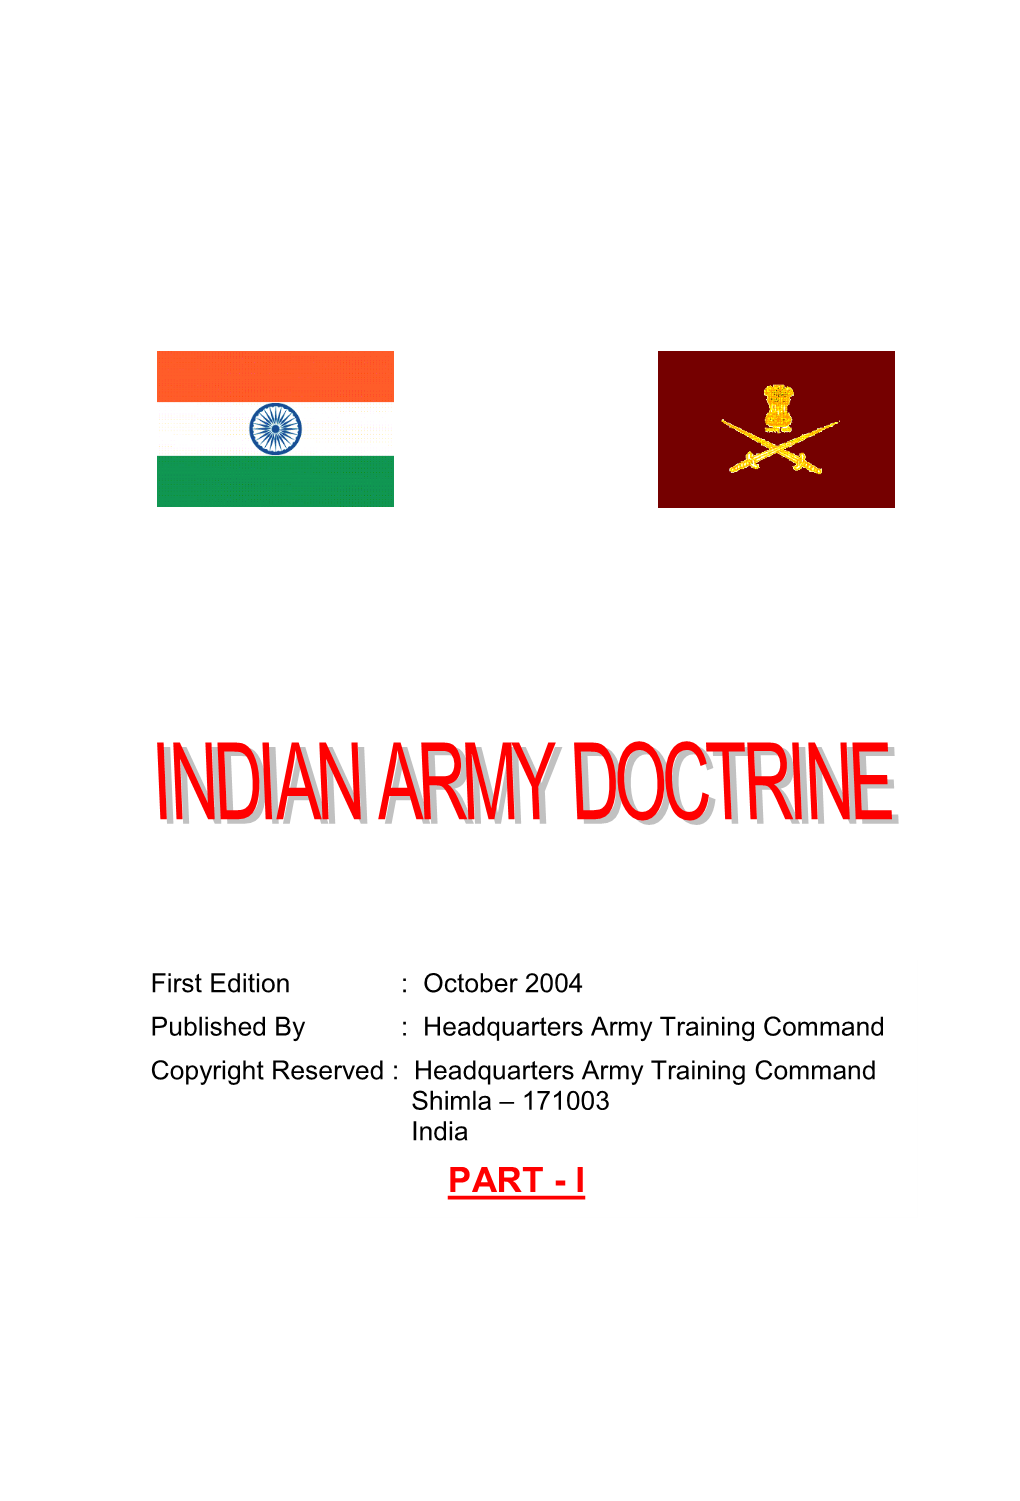 Indian Army Doctrine Is Structured As a Two-Part Document